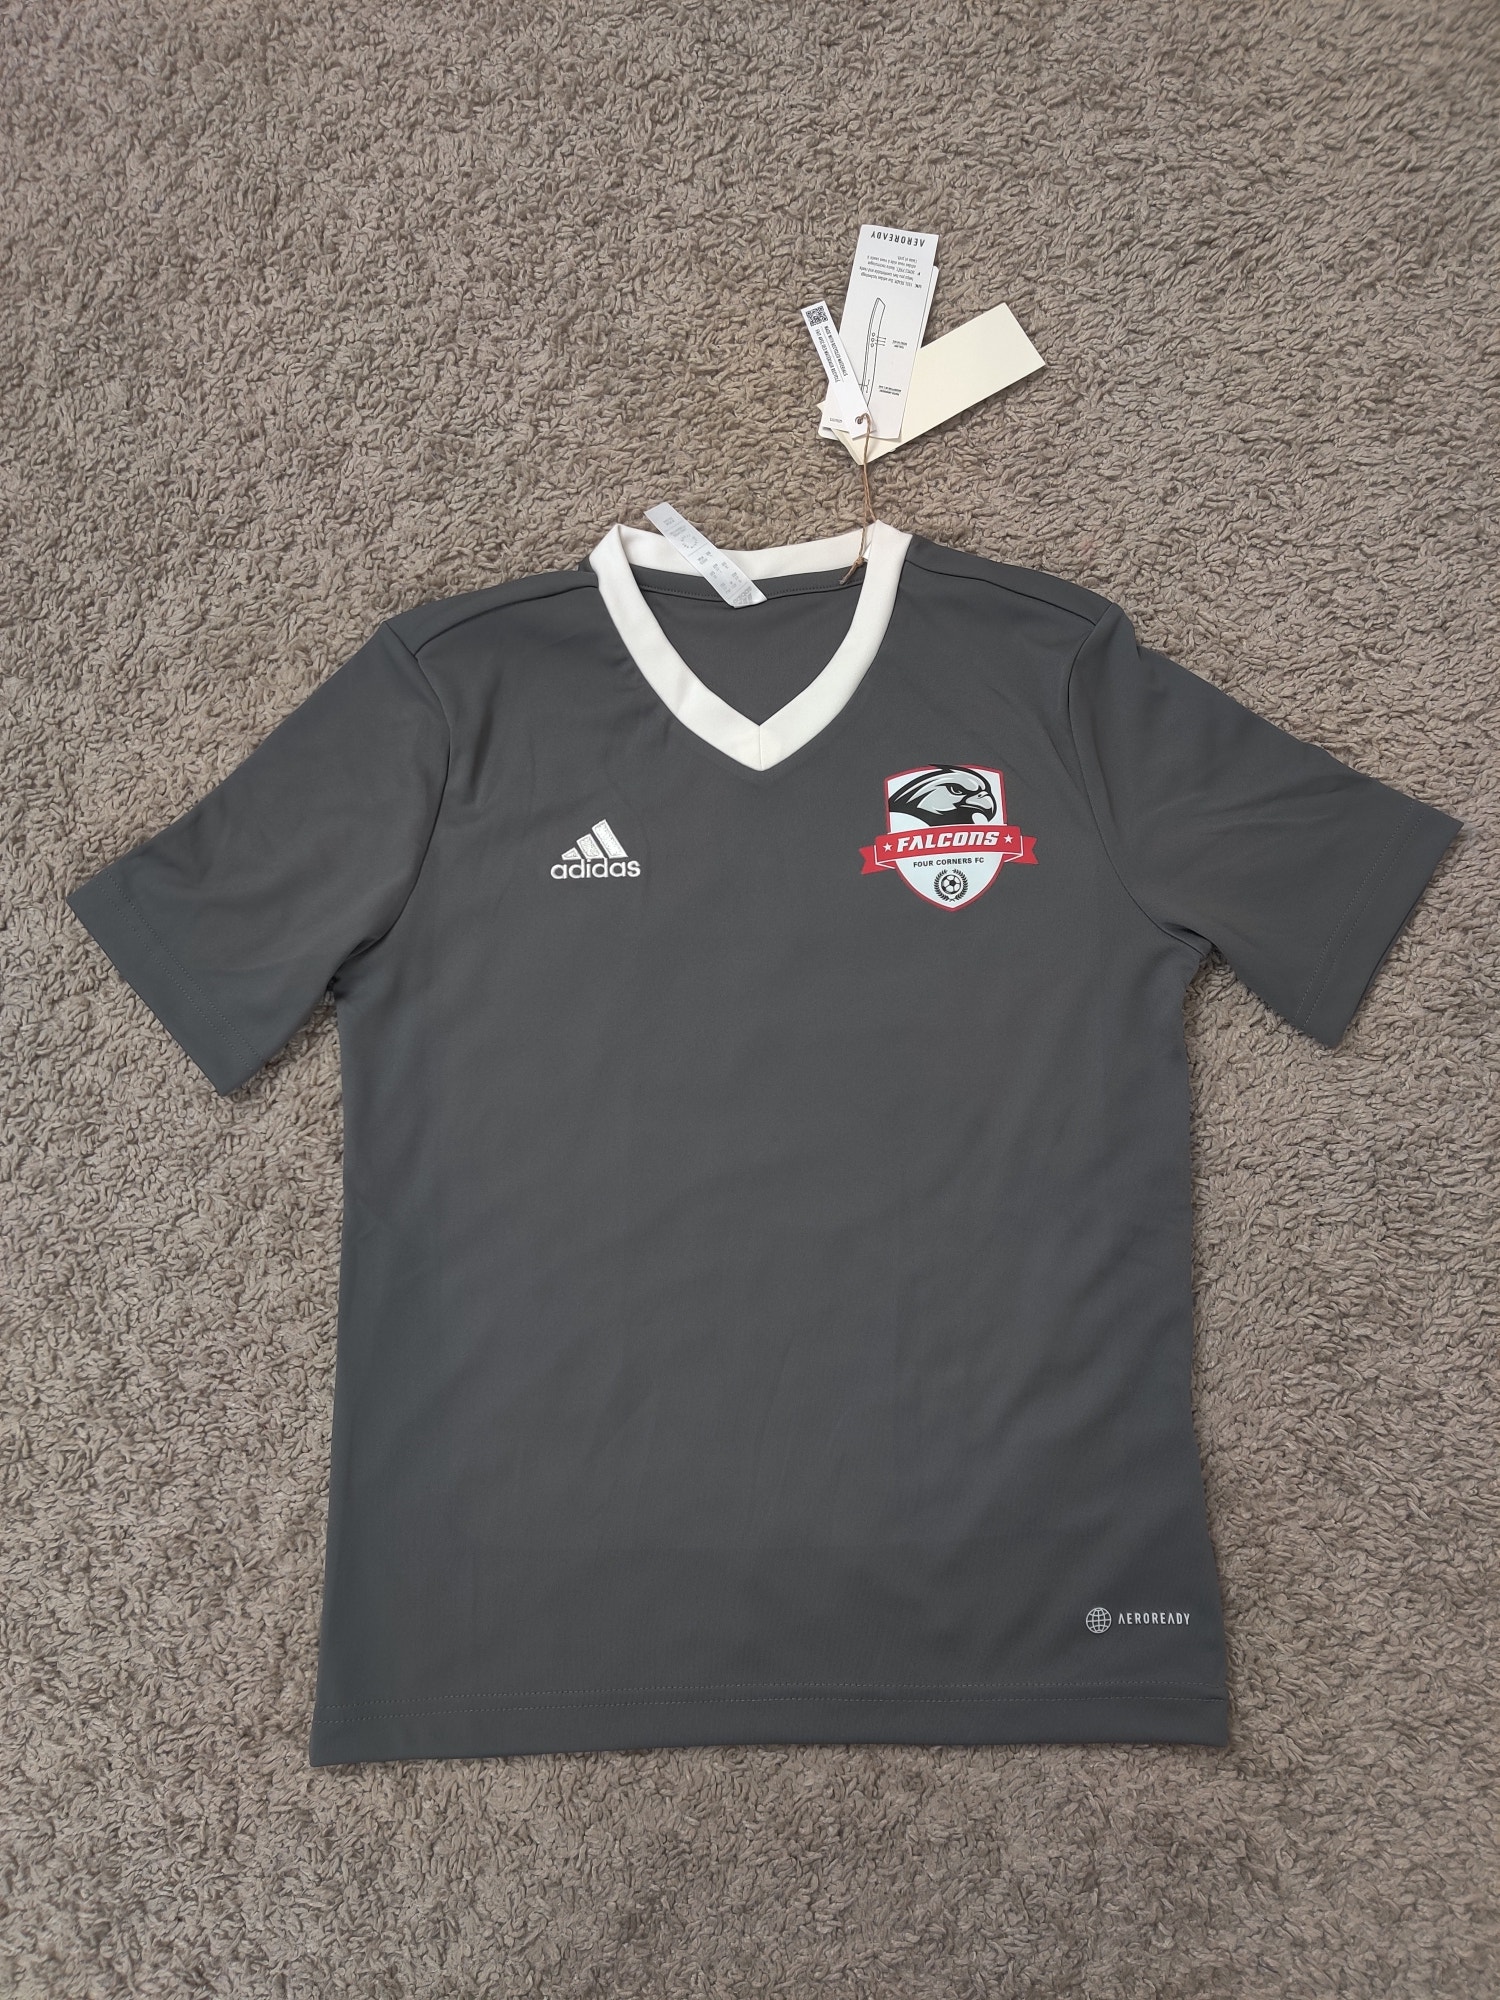 (V) NEW Adidas Youth Falcons Four Cornes FC #40 shirt soccer jersey sz M - Picture 1 of 9